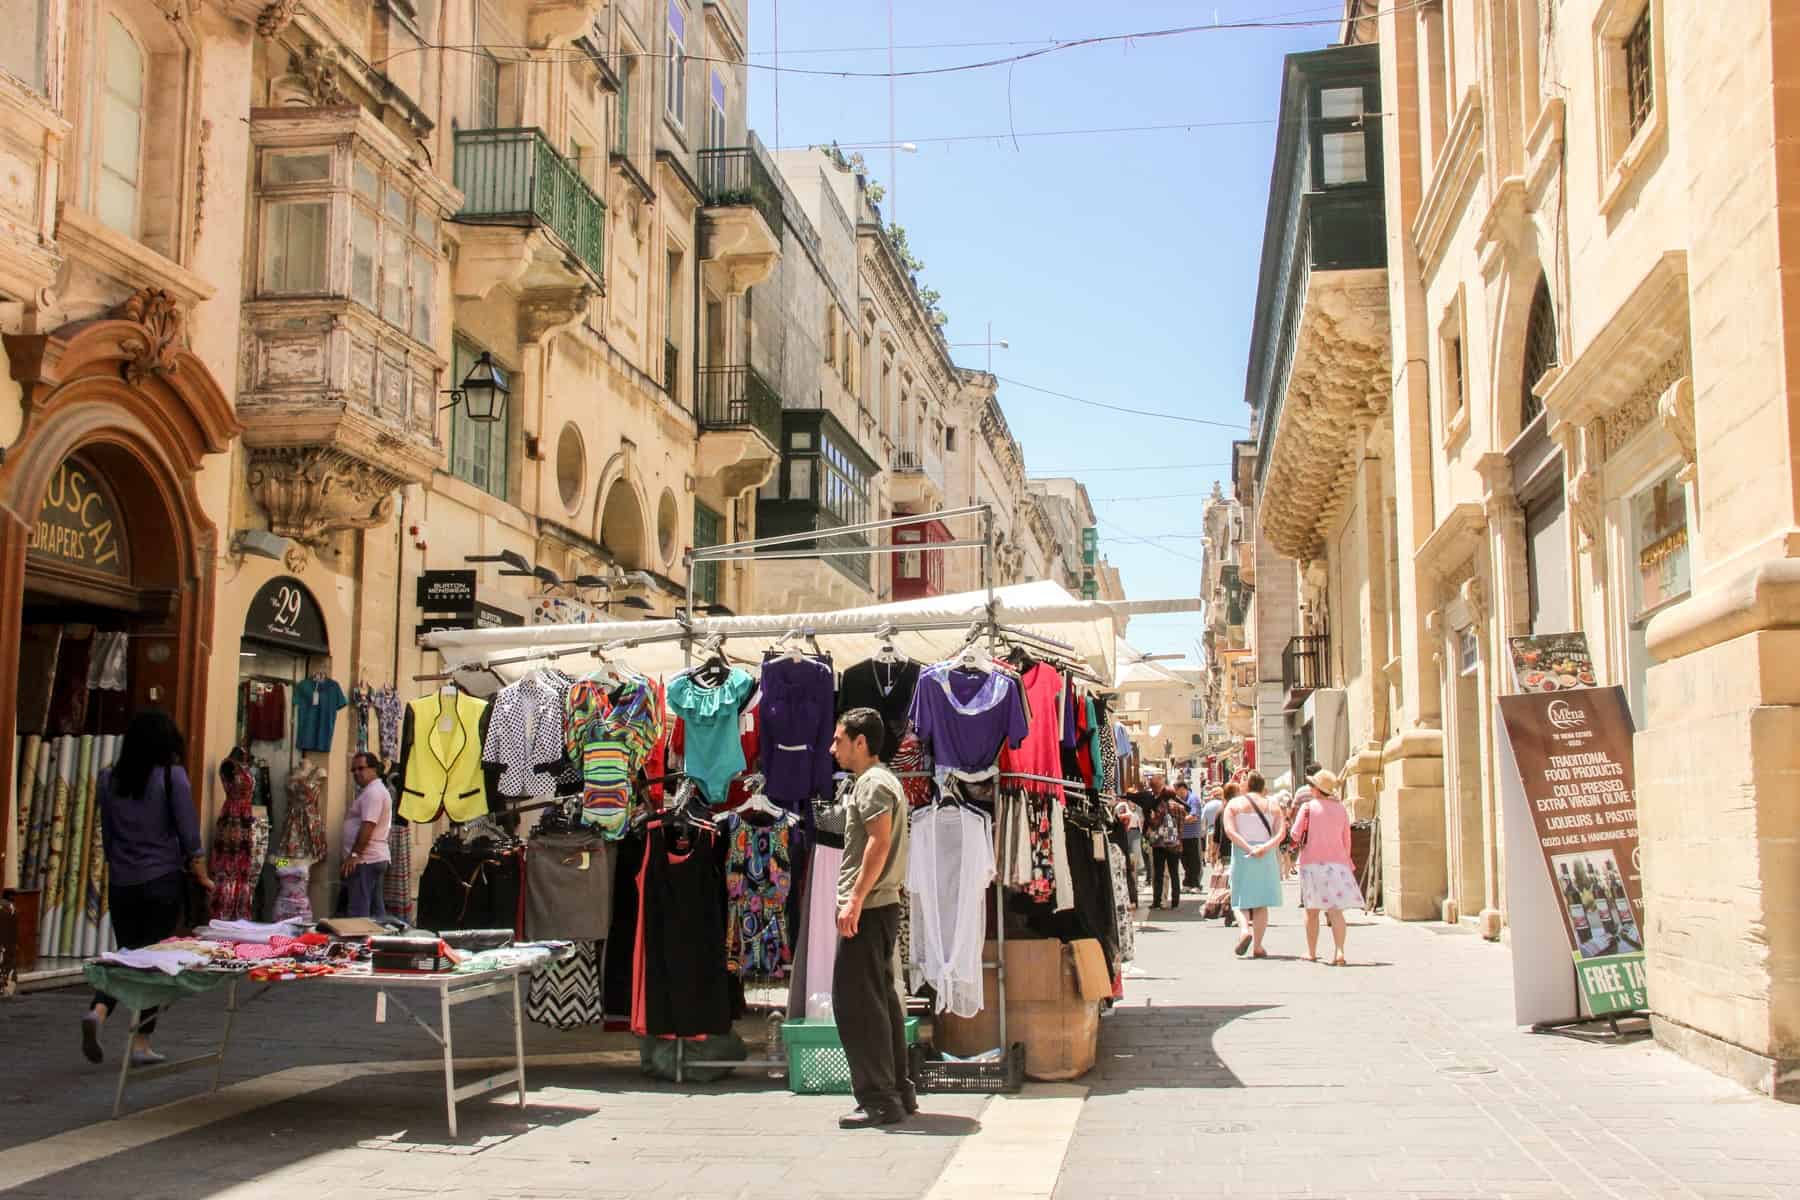 A man stands next to a market stall in the golden streets of Valletta, Malta, selling clothing in various bright colours. 